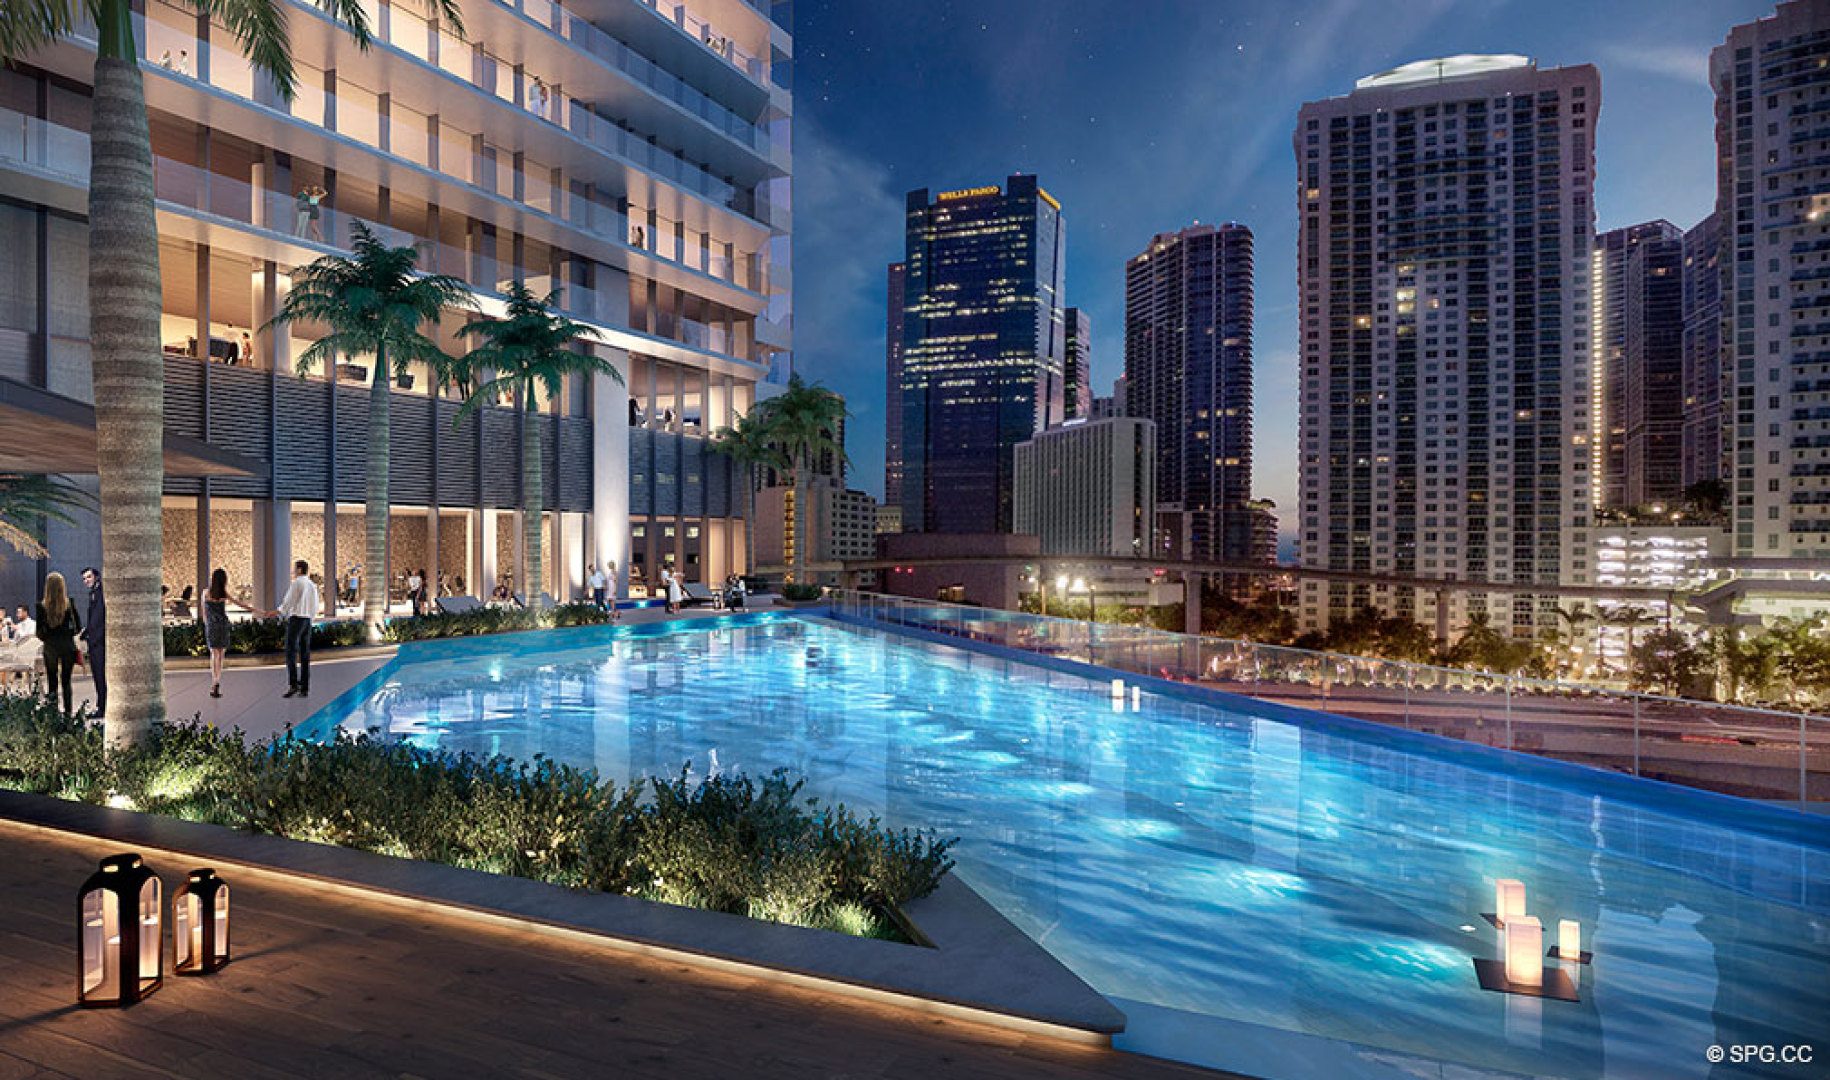 Spend Evenings Poolside at One River Point, Luxury Waterfront Condos in Miami, Florida 33130